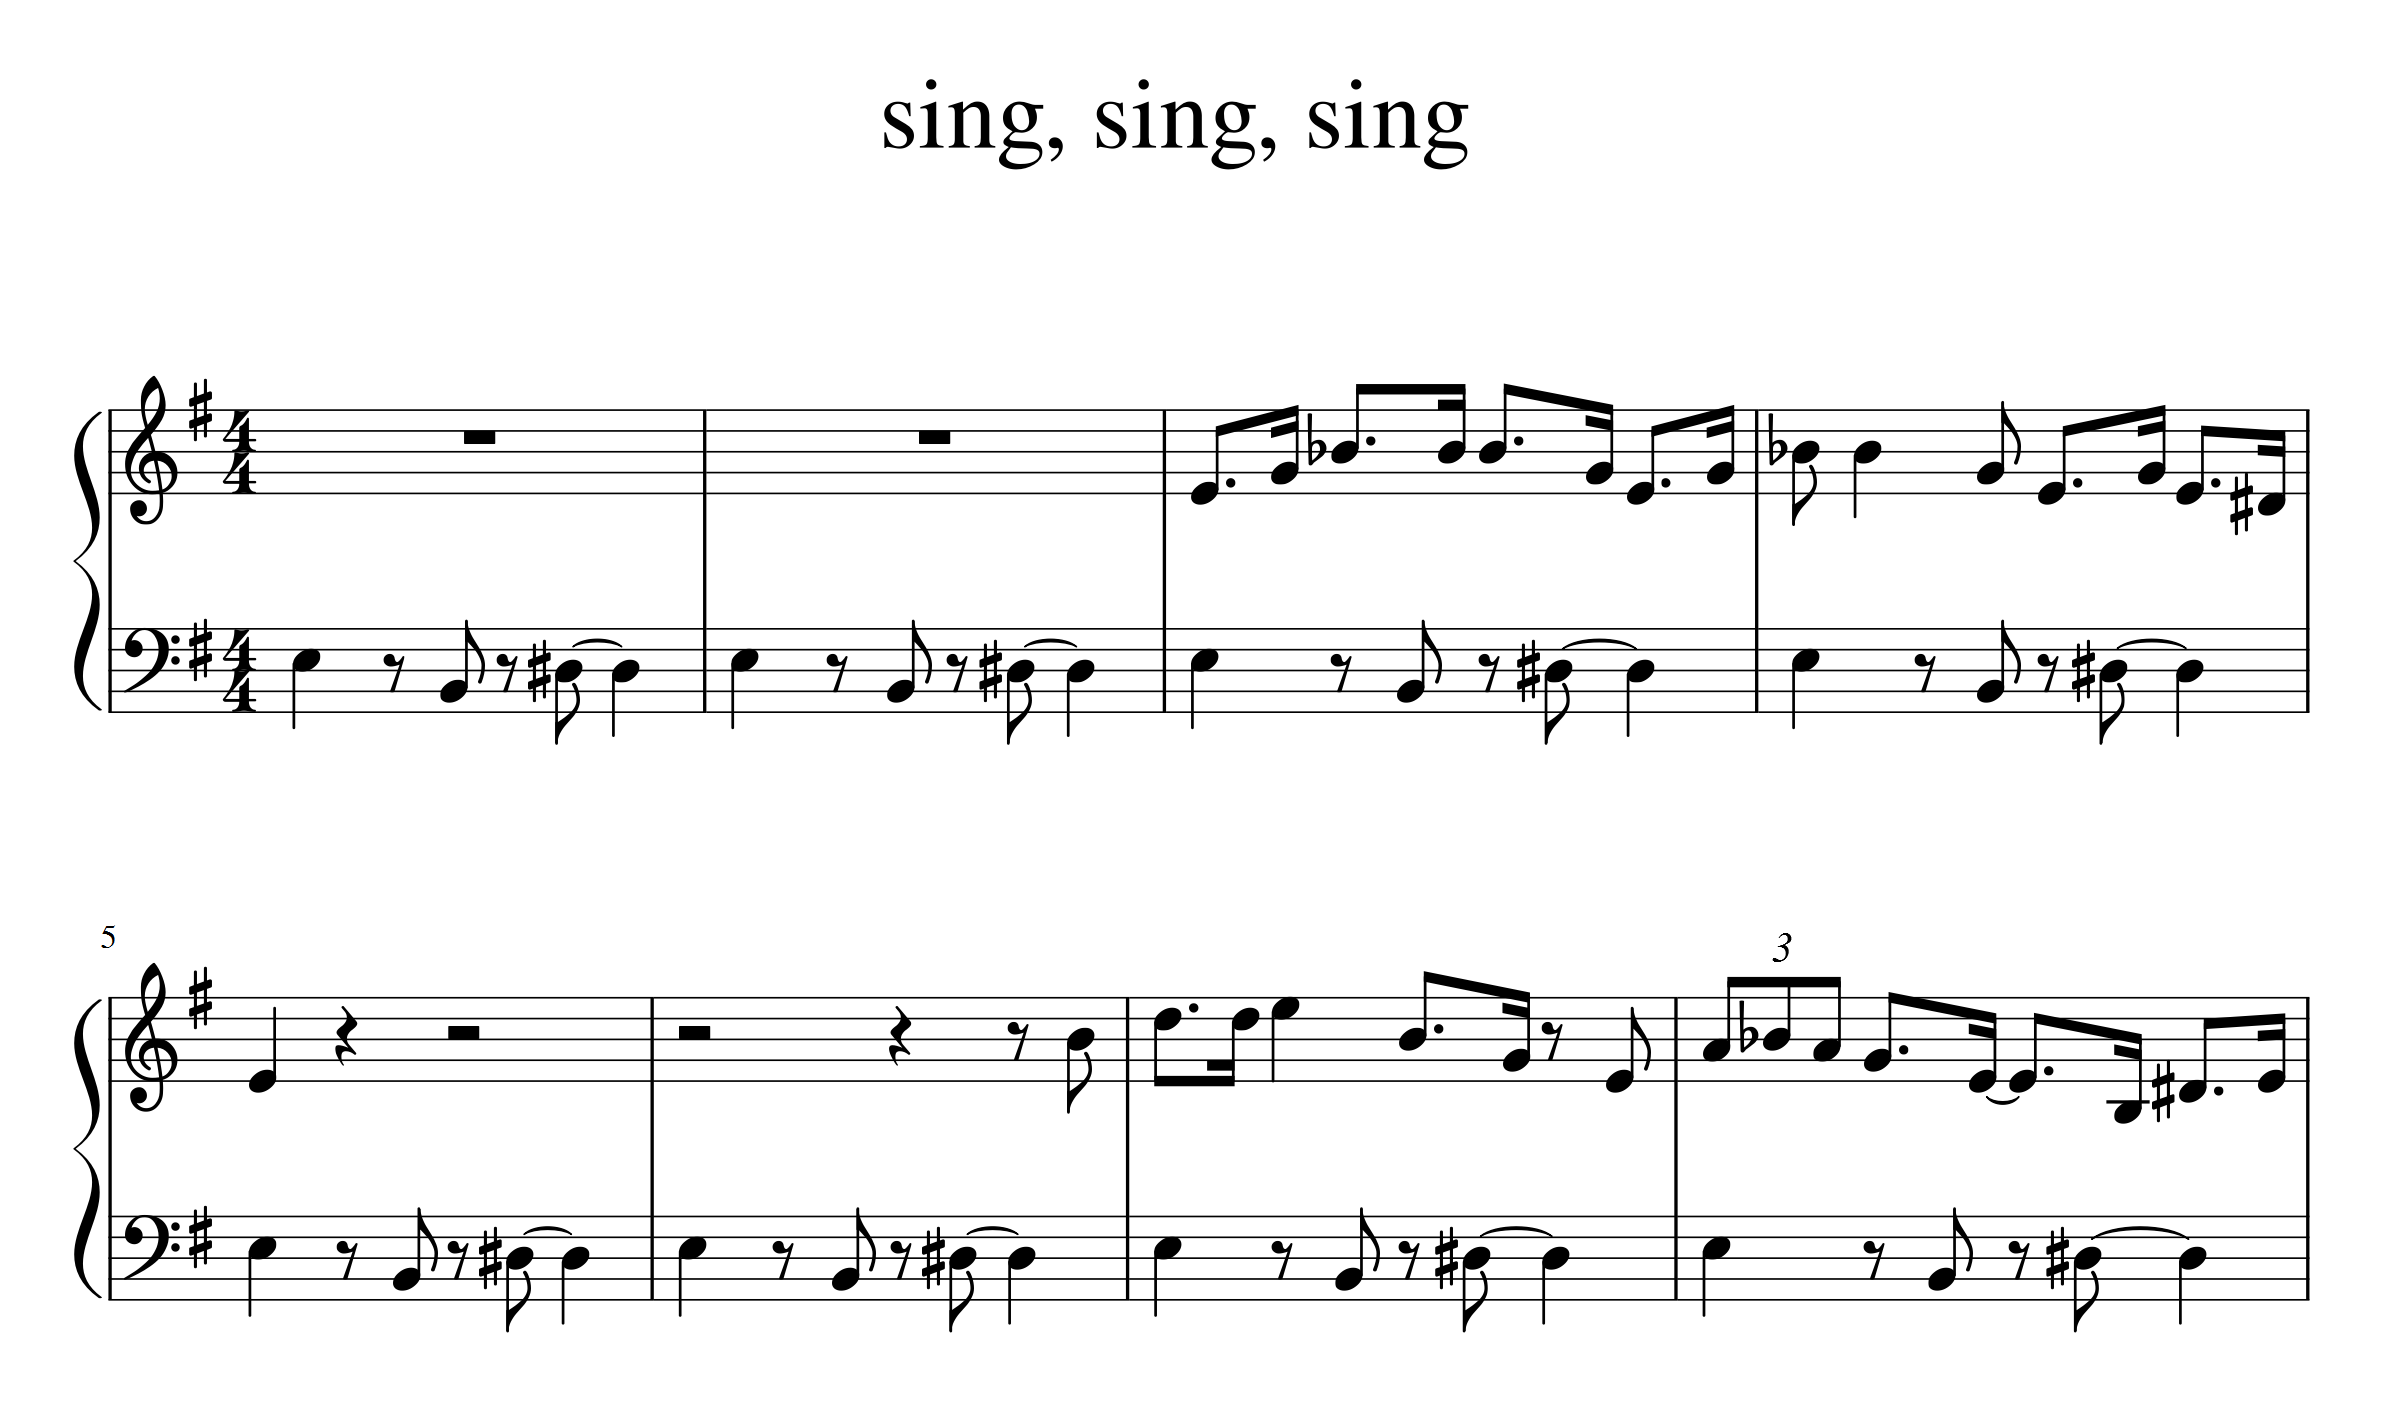 Sing, Sing, Sing for piano. Sheet music and midi files for piano.